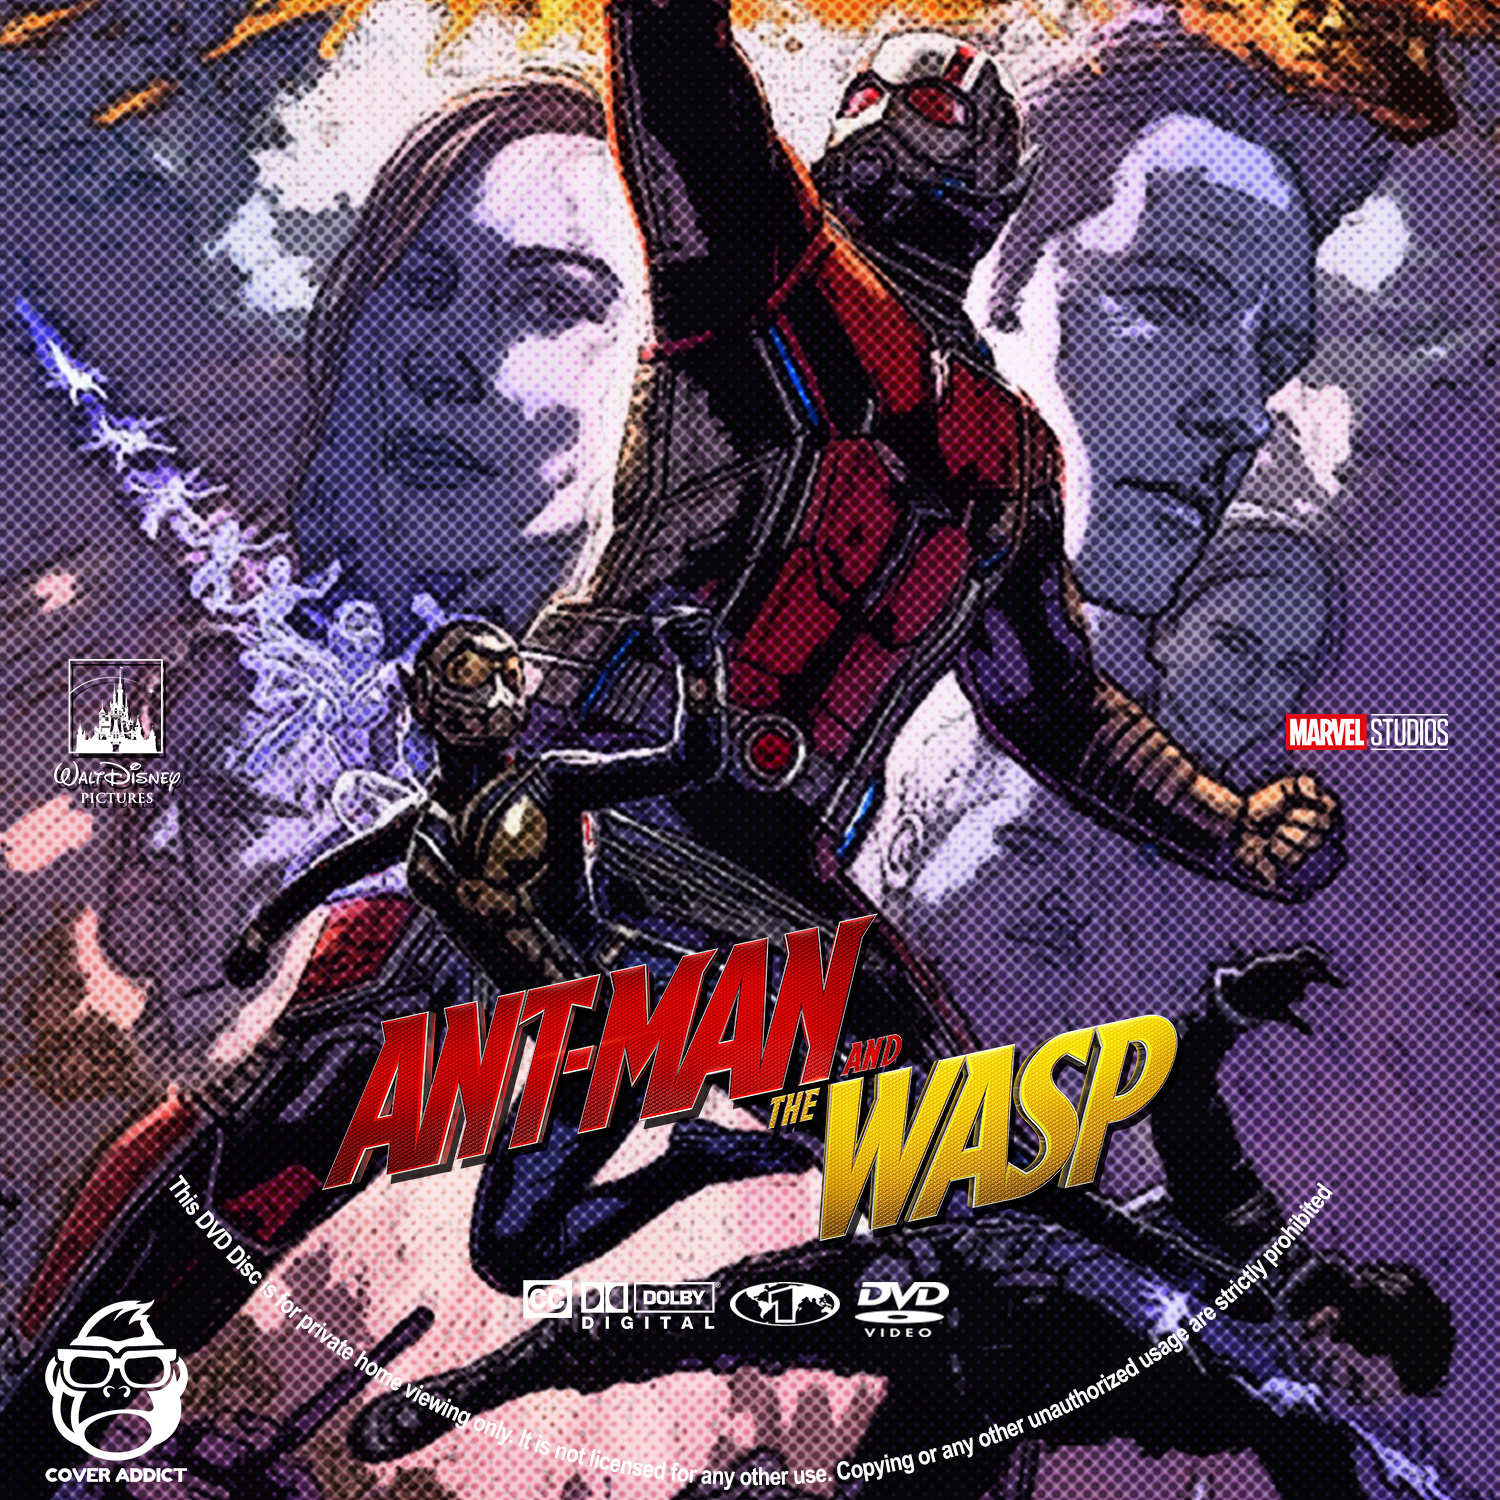 Ant-Man and the Wasp DVD Label - Cover Addict - Freecovers